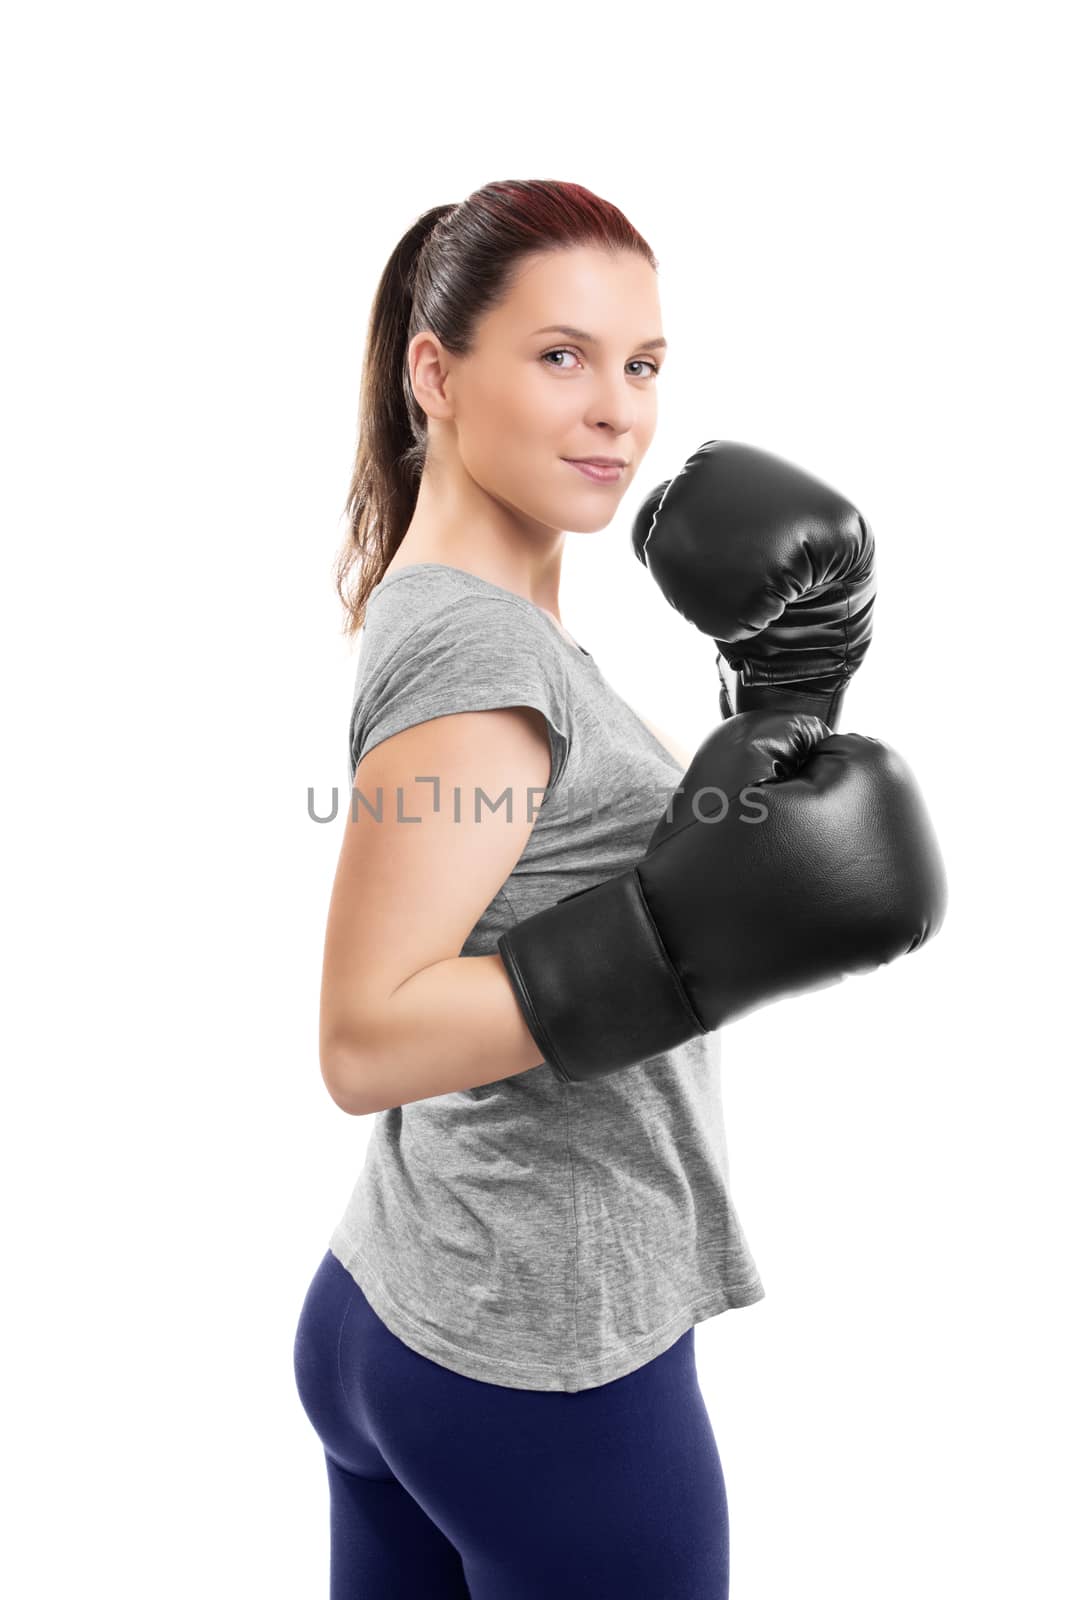 Portrait of a beautiful young woman with boxing gloves in a stance with raised arms, isolated on white background.